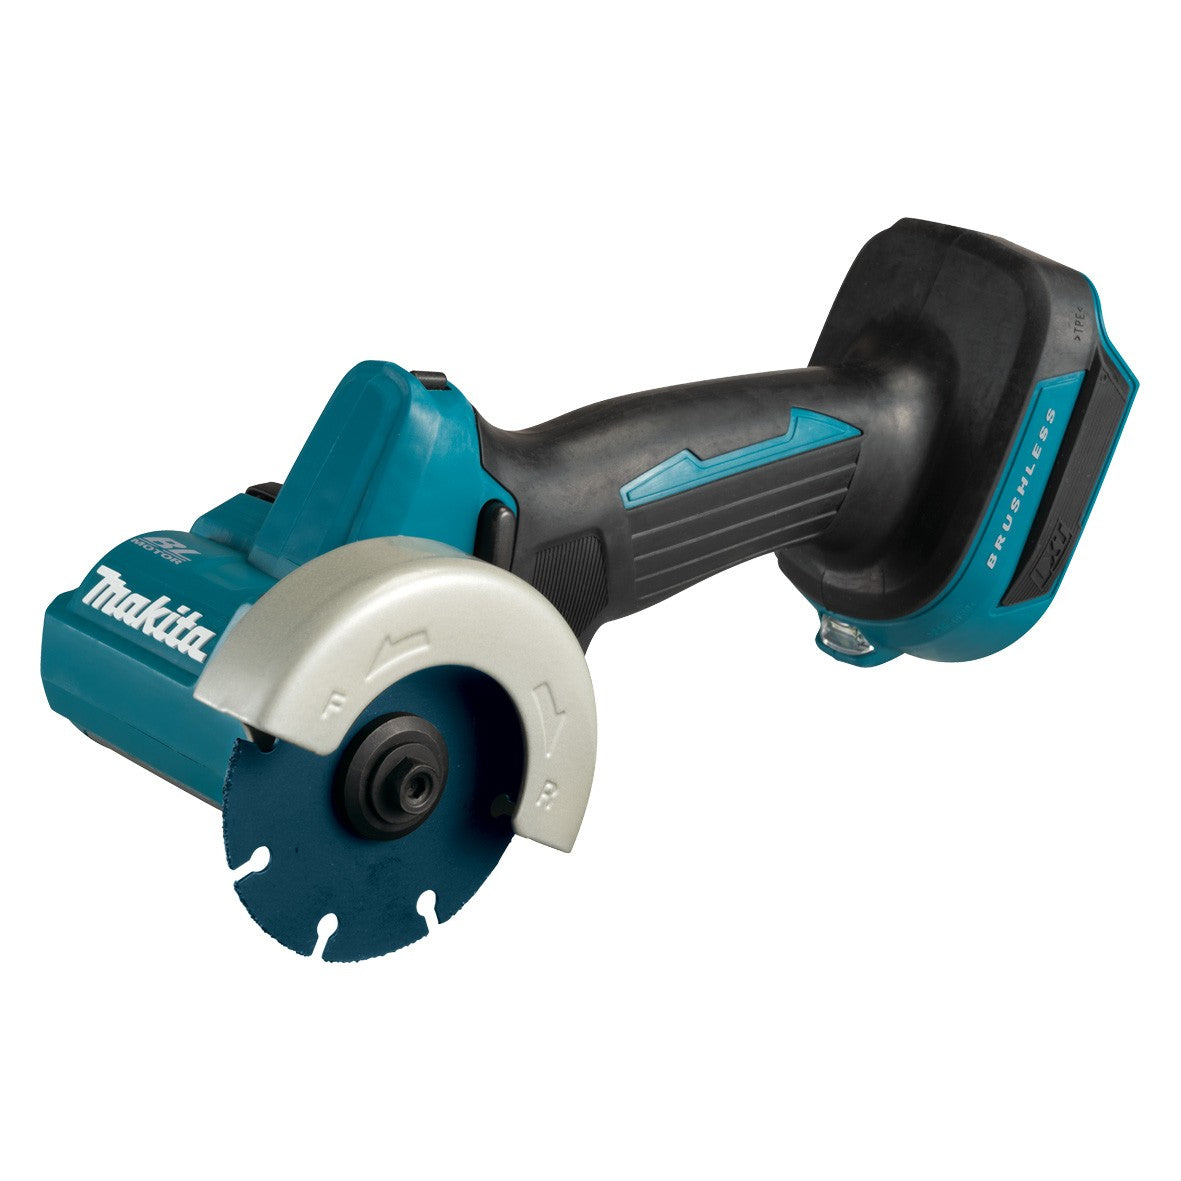 18V Brushless Compact 76mm Cut Off Saw Bare DMC300Z by Makita